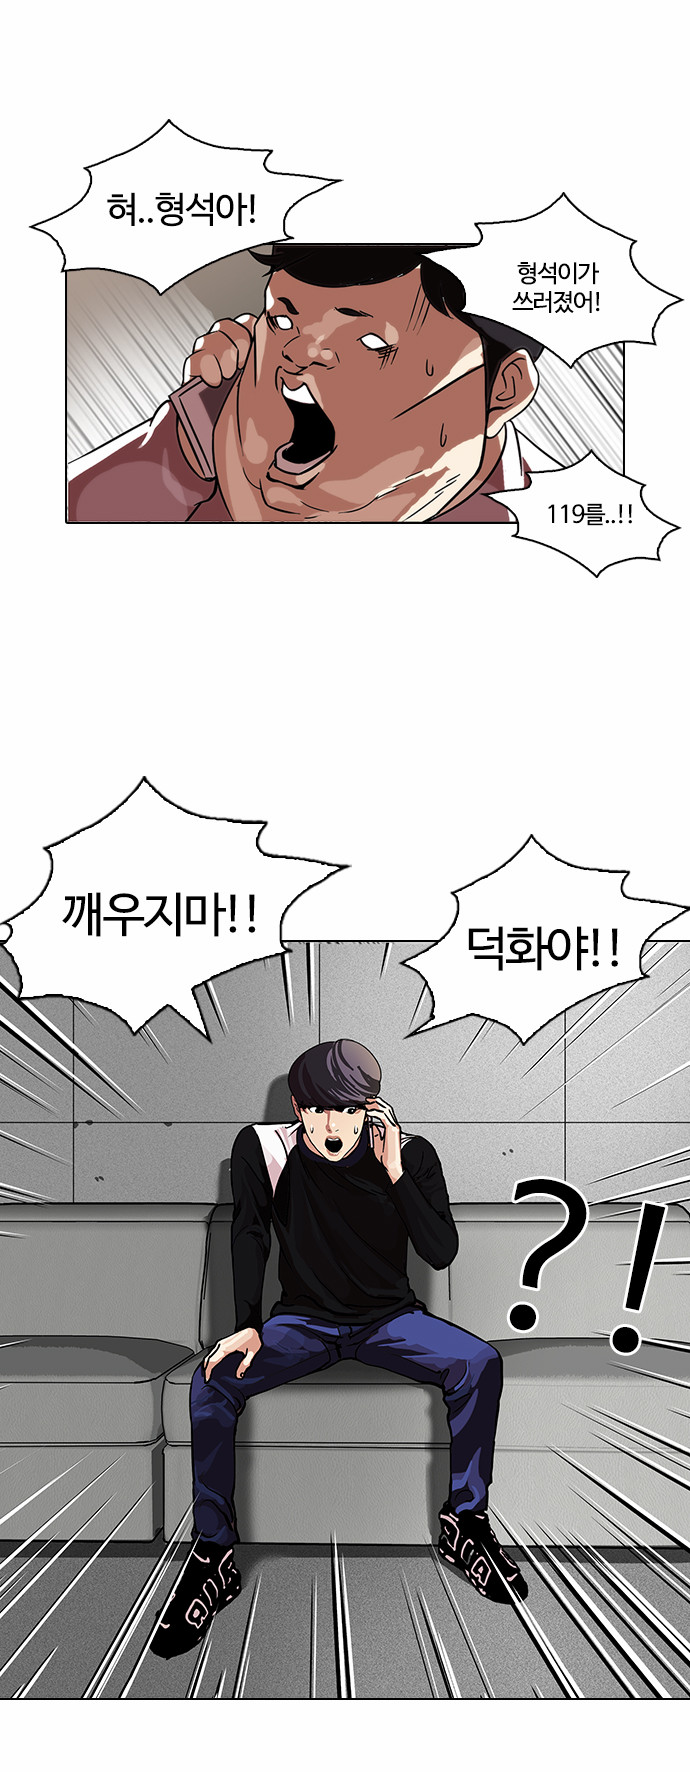 Lookism - Chapter 104 - Page 3